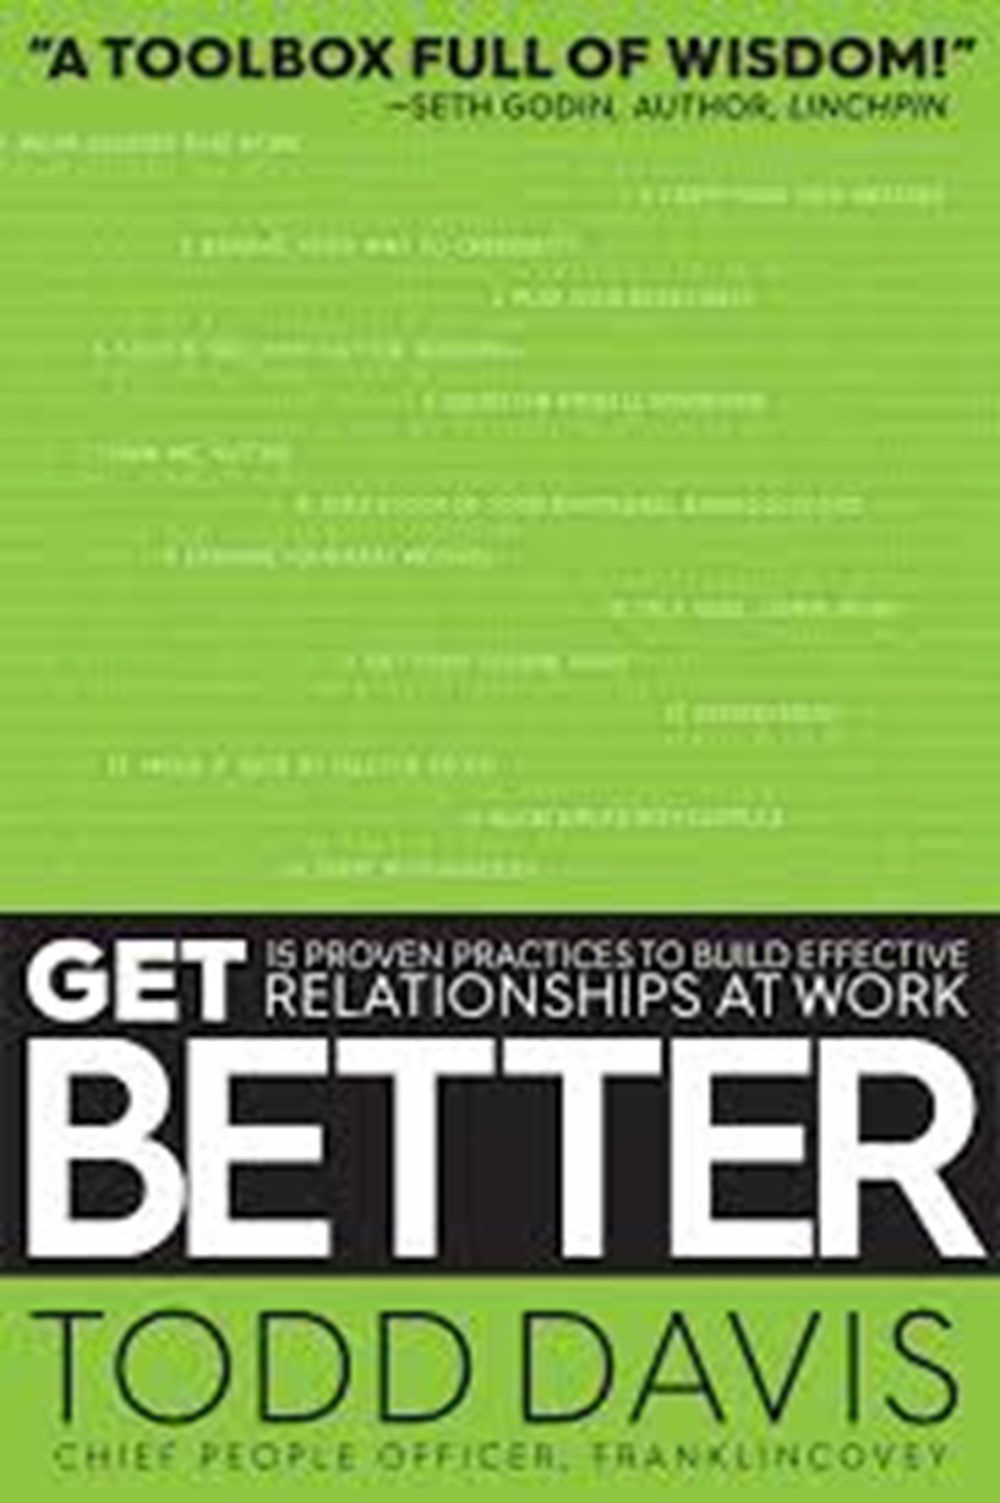 Get Better: 15 Proven Practices to Build Effective Relationships at Work